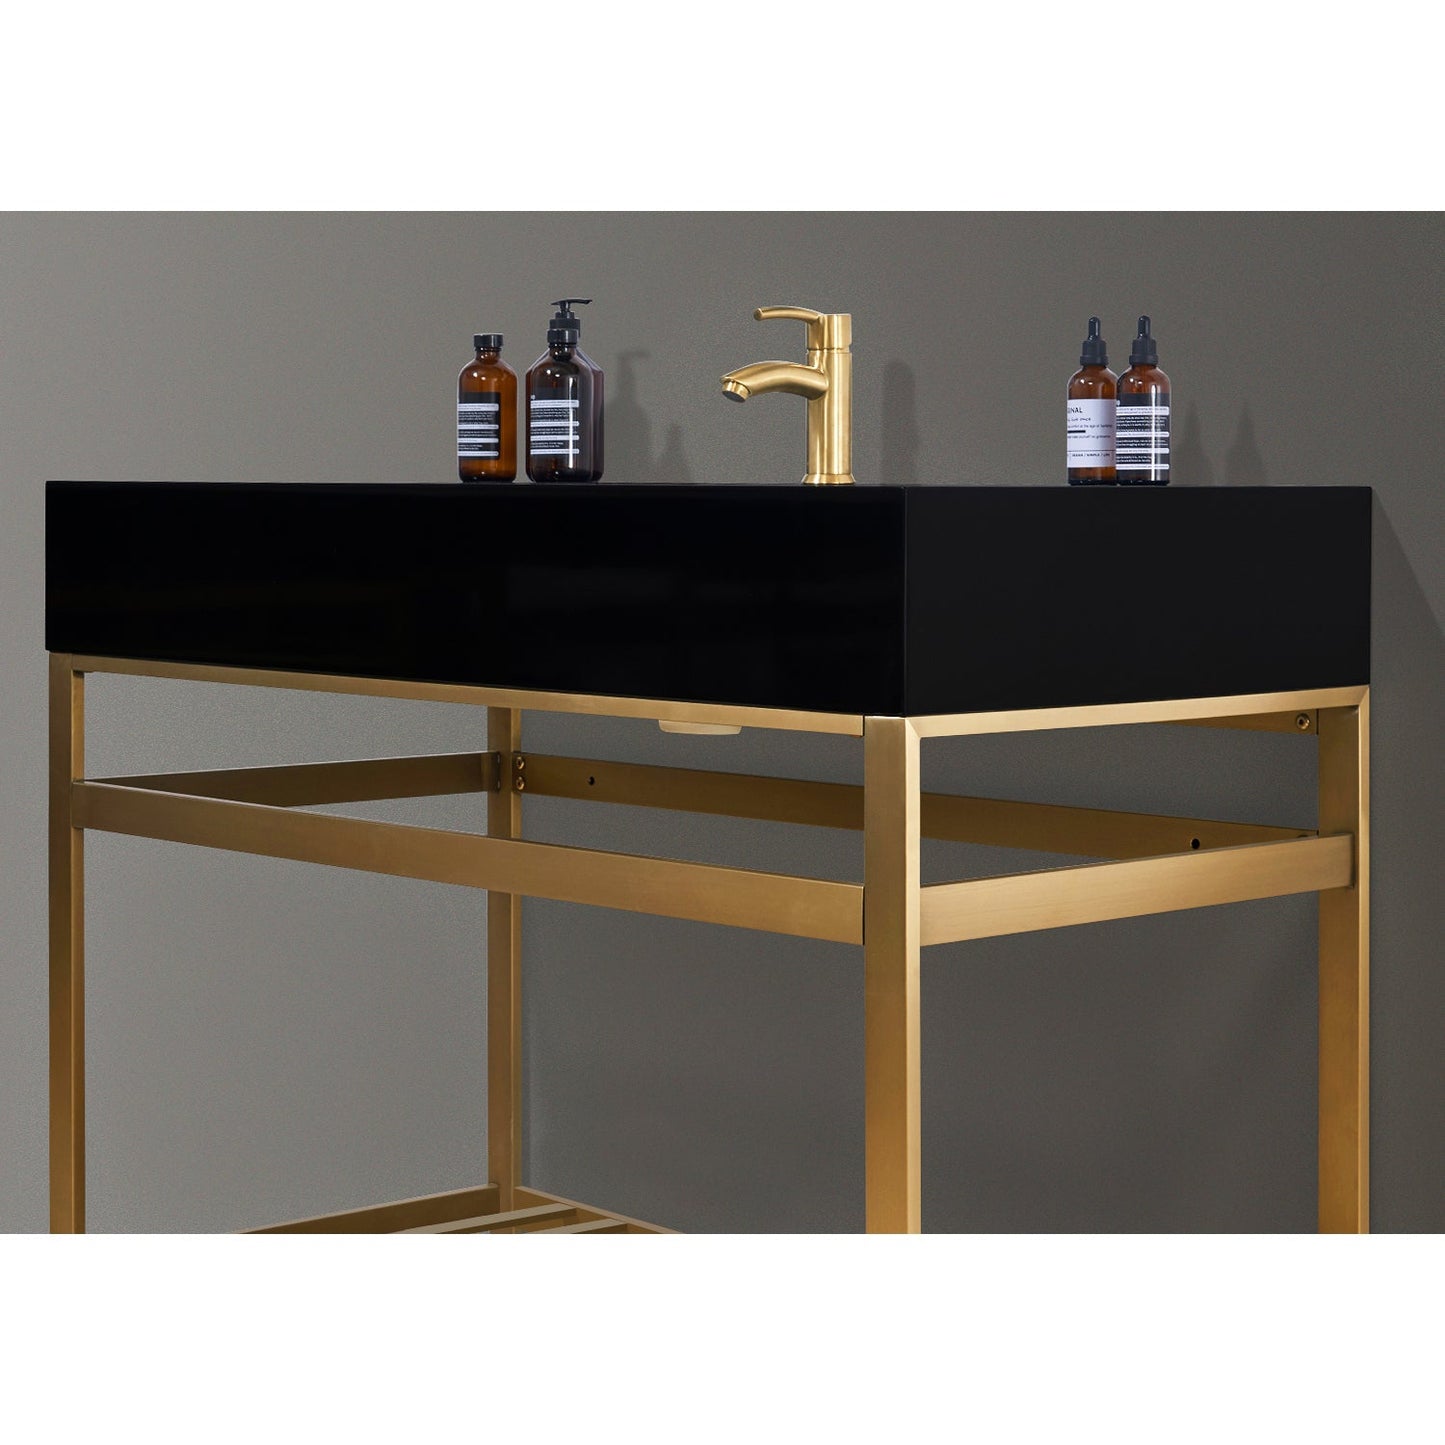 Nauders 42" Single Stainless Steel Vanity Console in Brushed Gold with Imperial Black Stone Countertop without Mirror